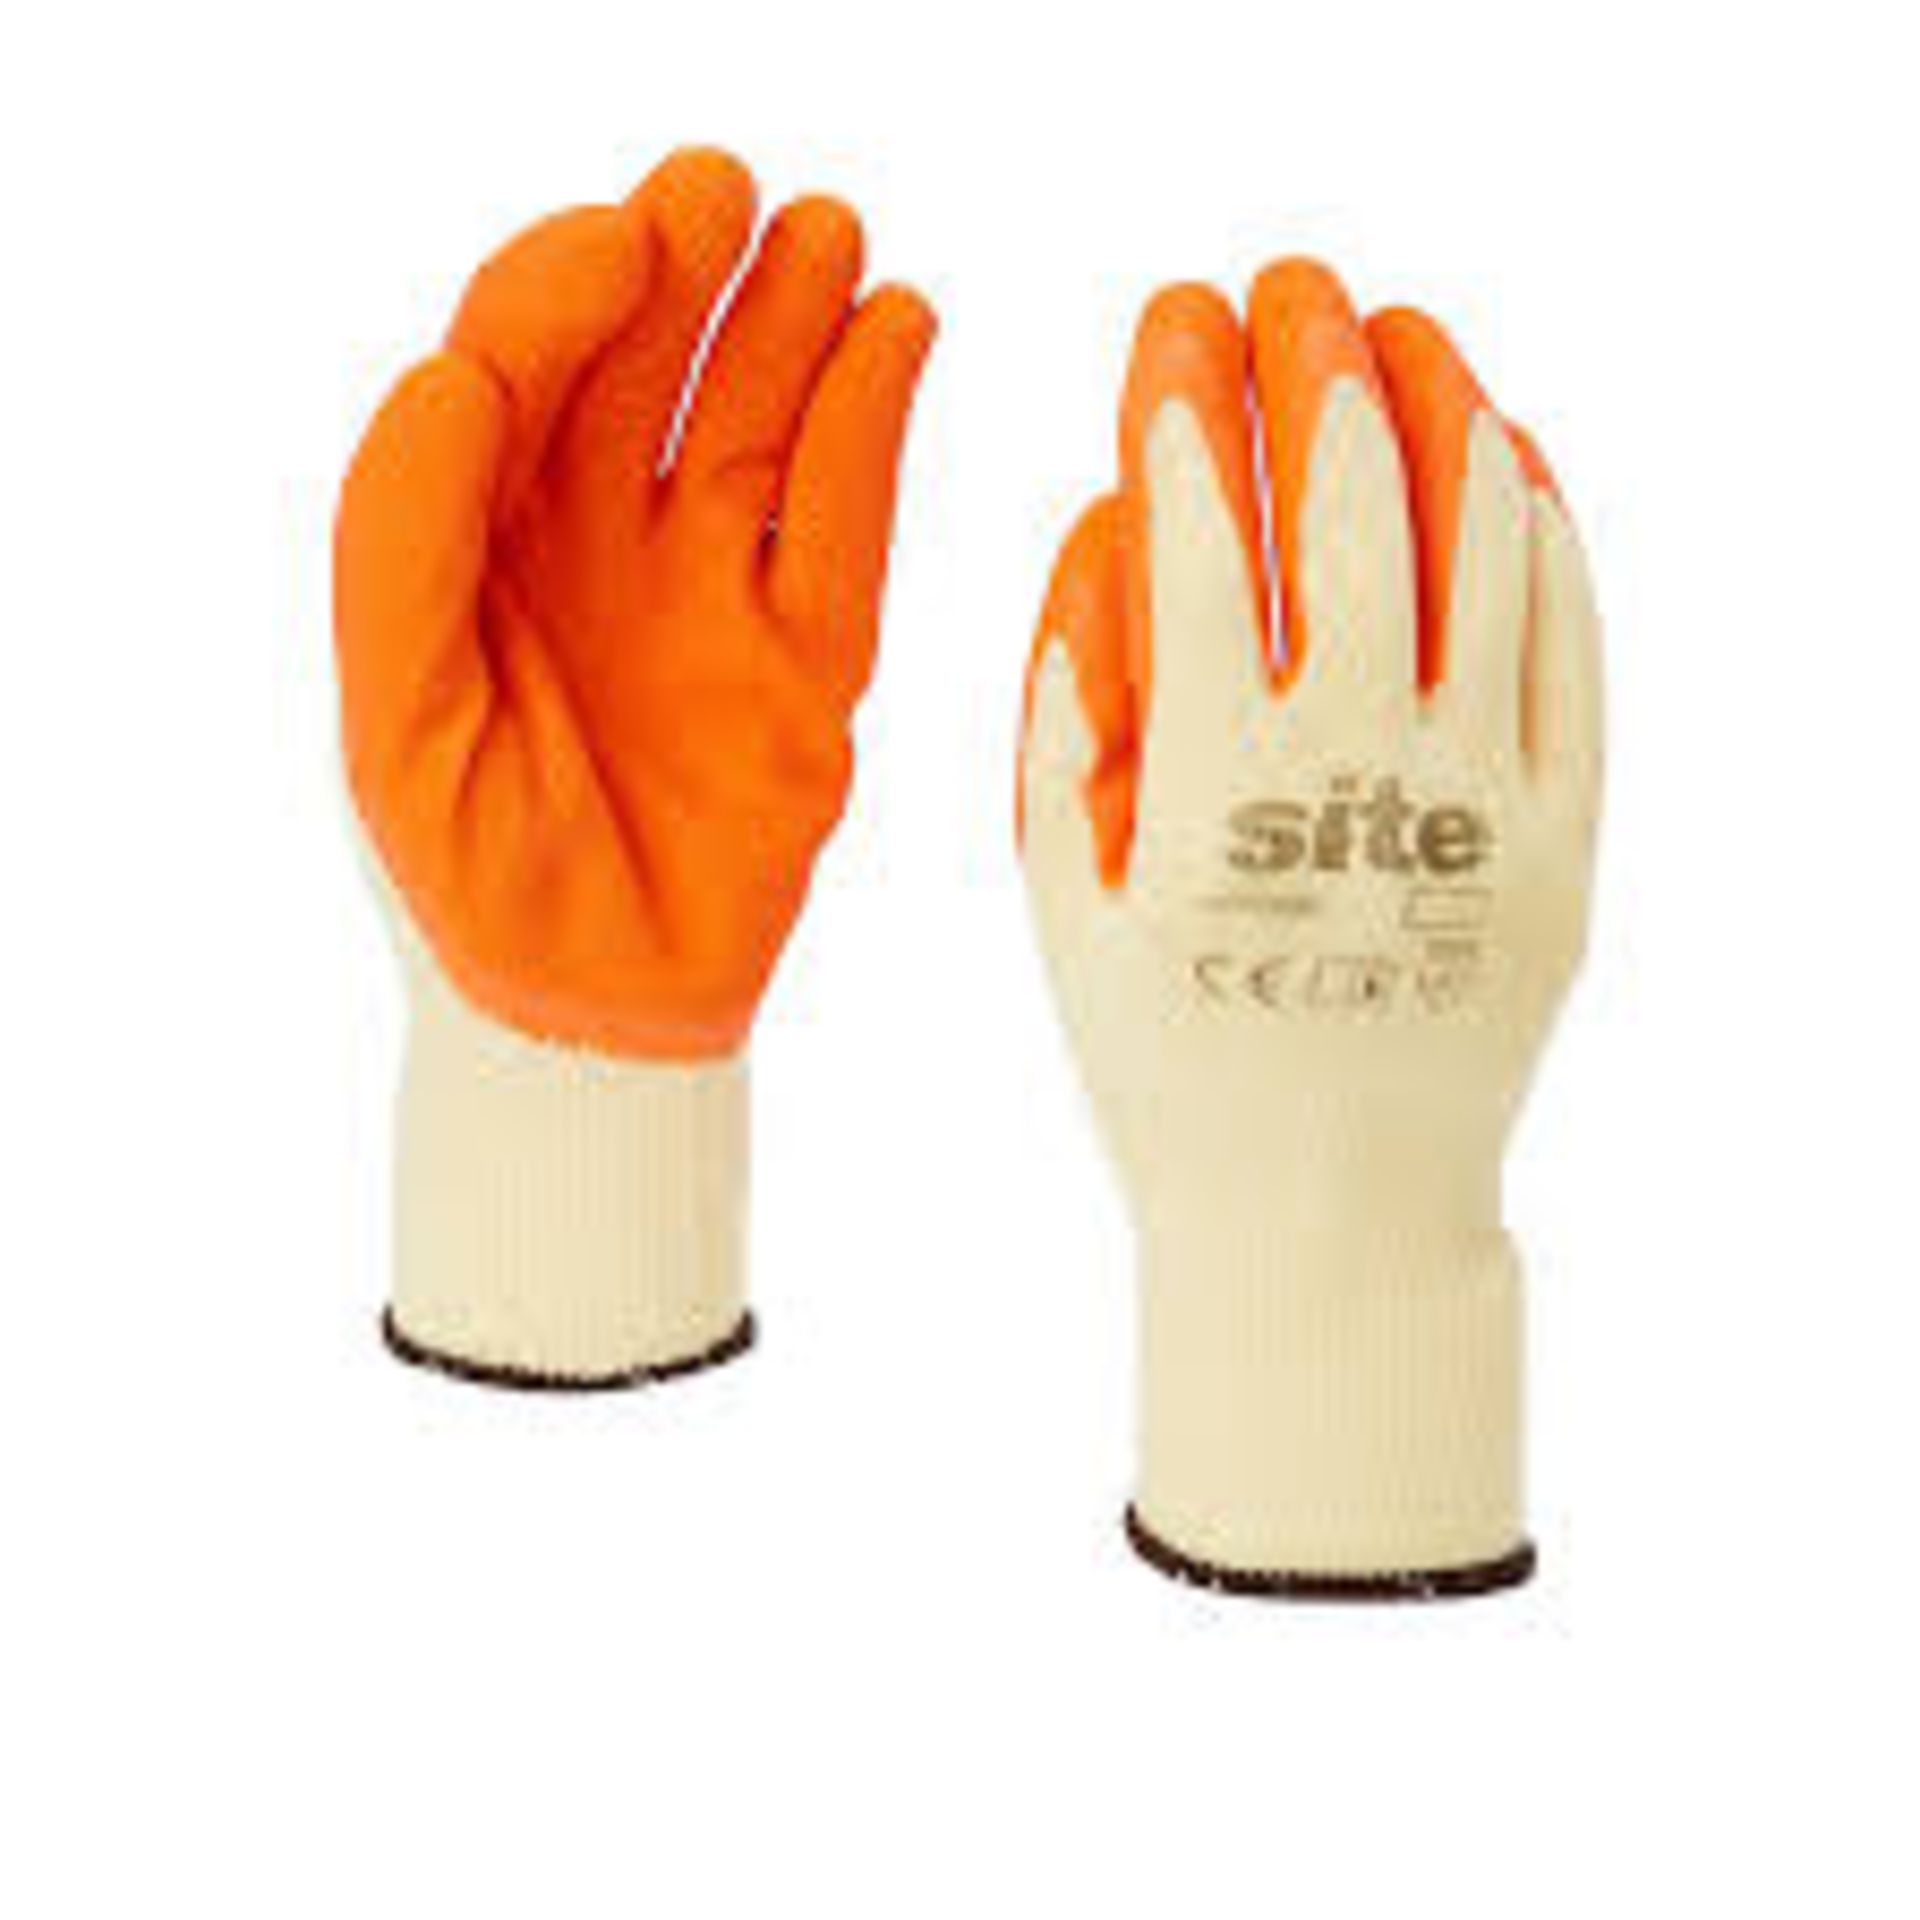 65 Pairs of Site Latex & polycotton blend Orange Gloves. - R13a.10.